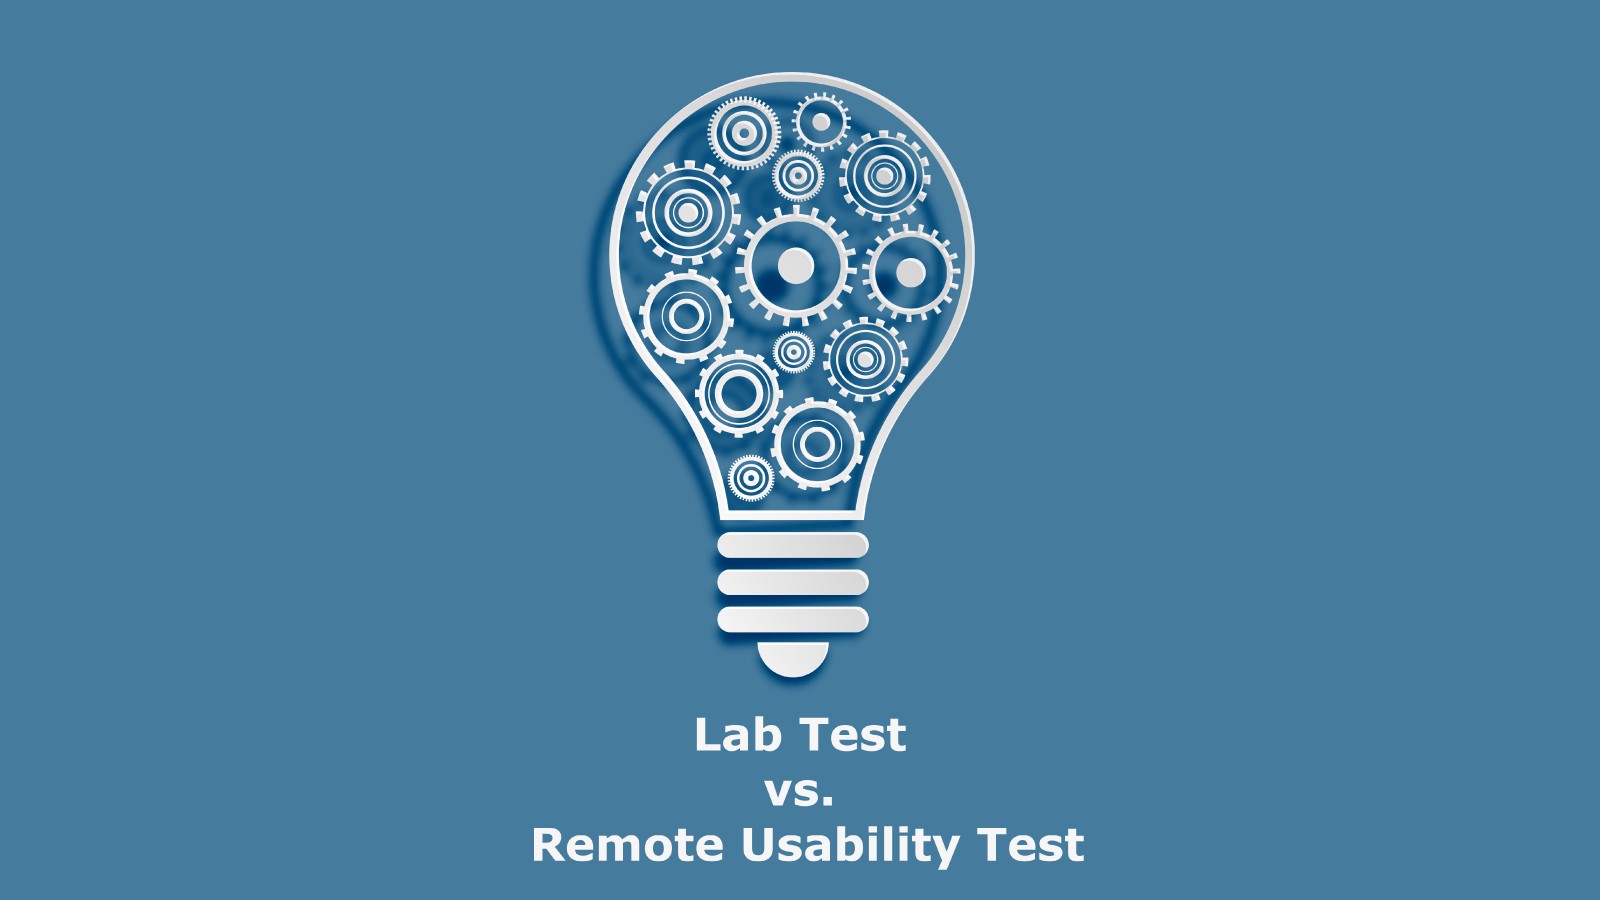 Remote usability testing vs. lab testing: 4 questions for making the right choice